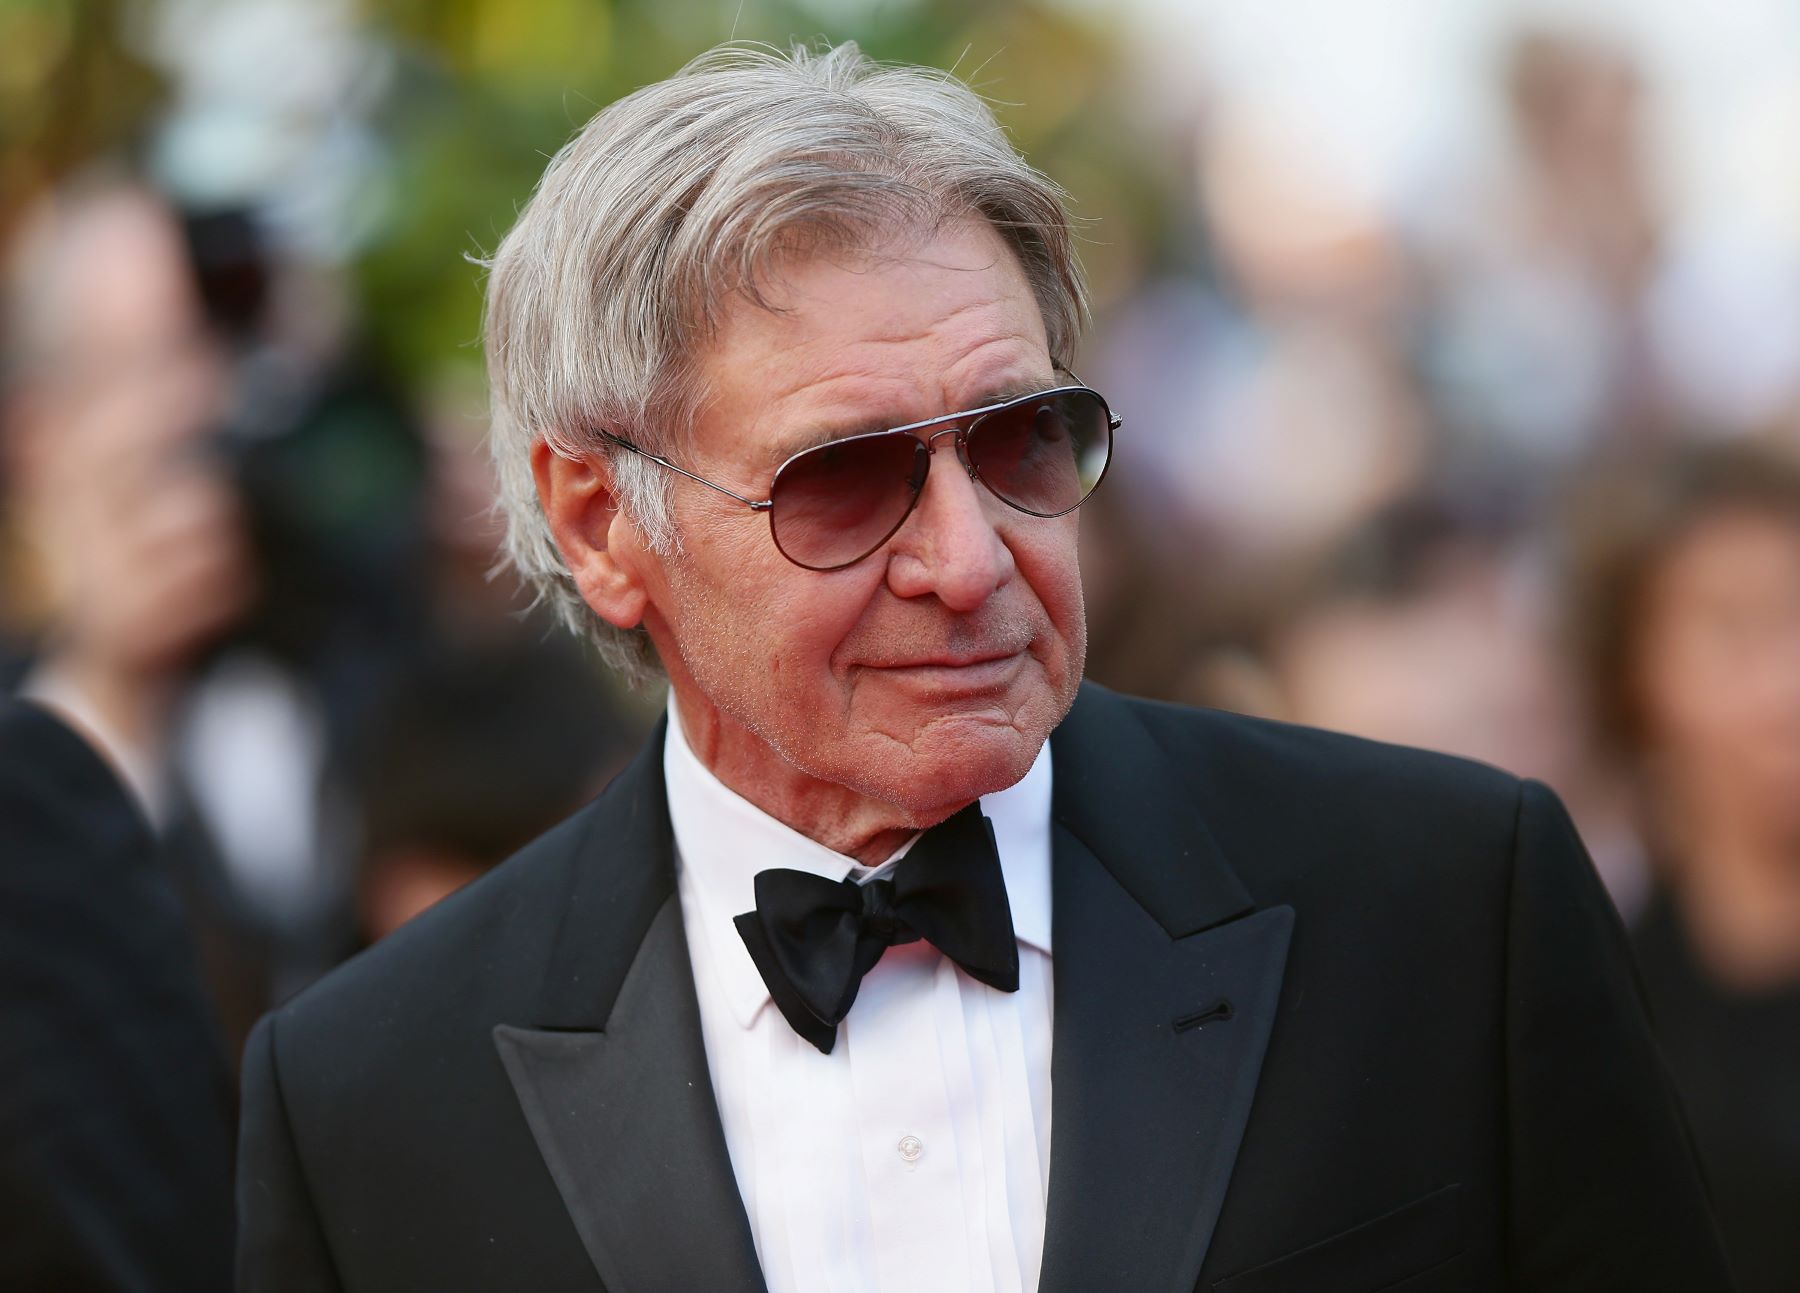 Harrison Ford at 'The Expendables 3' premiere at the 67th Annual Cannes Film Festival in France